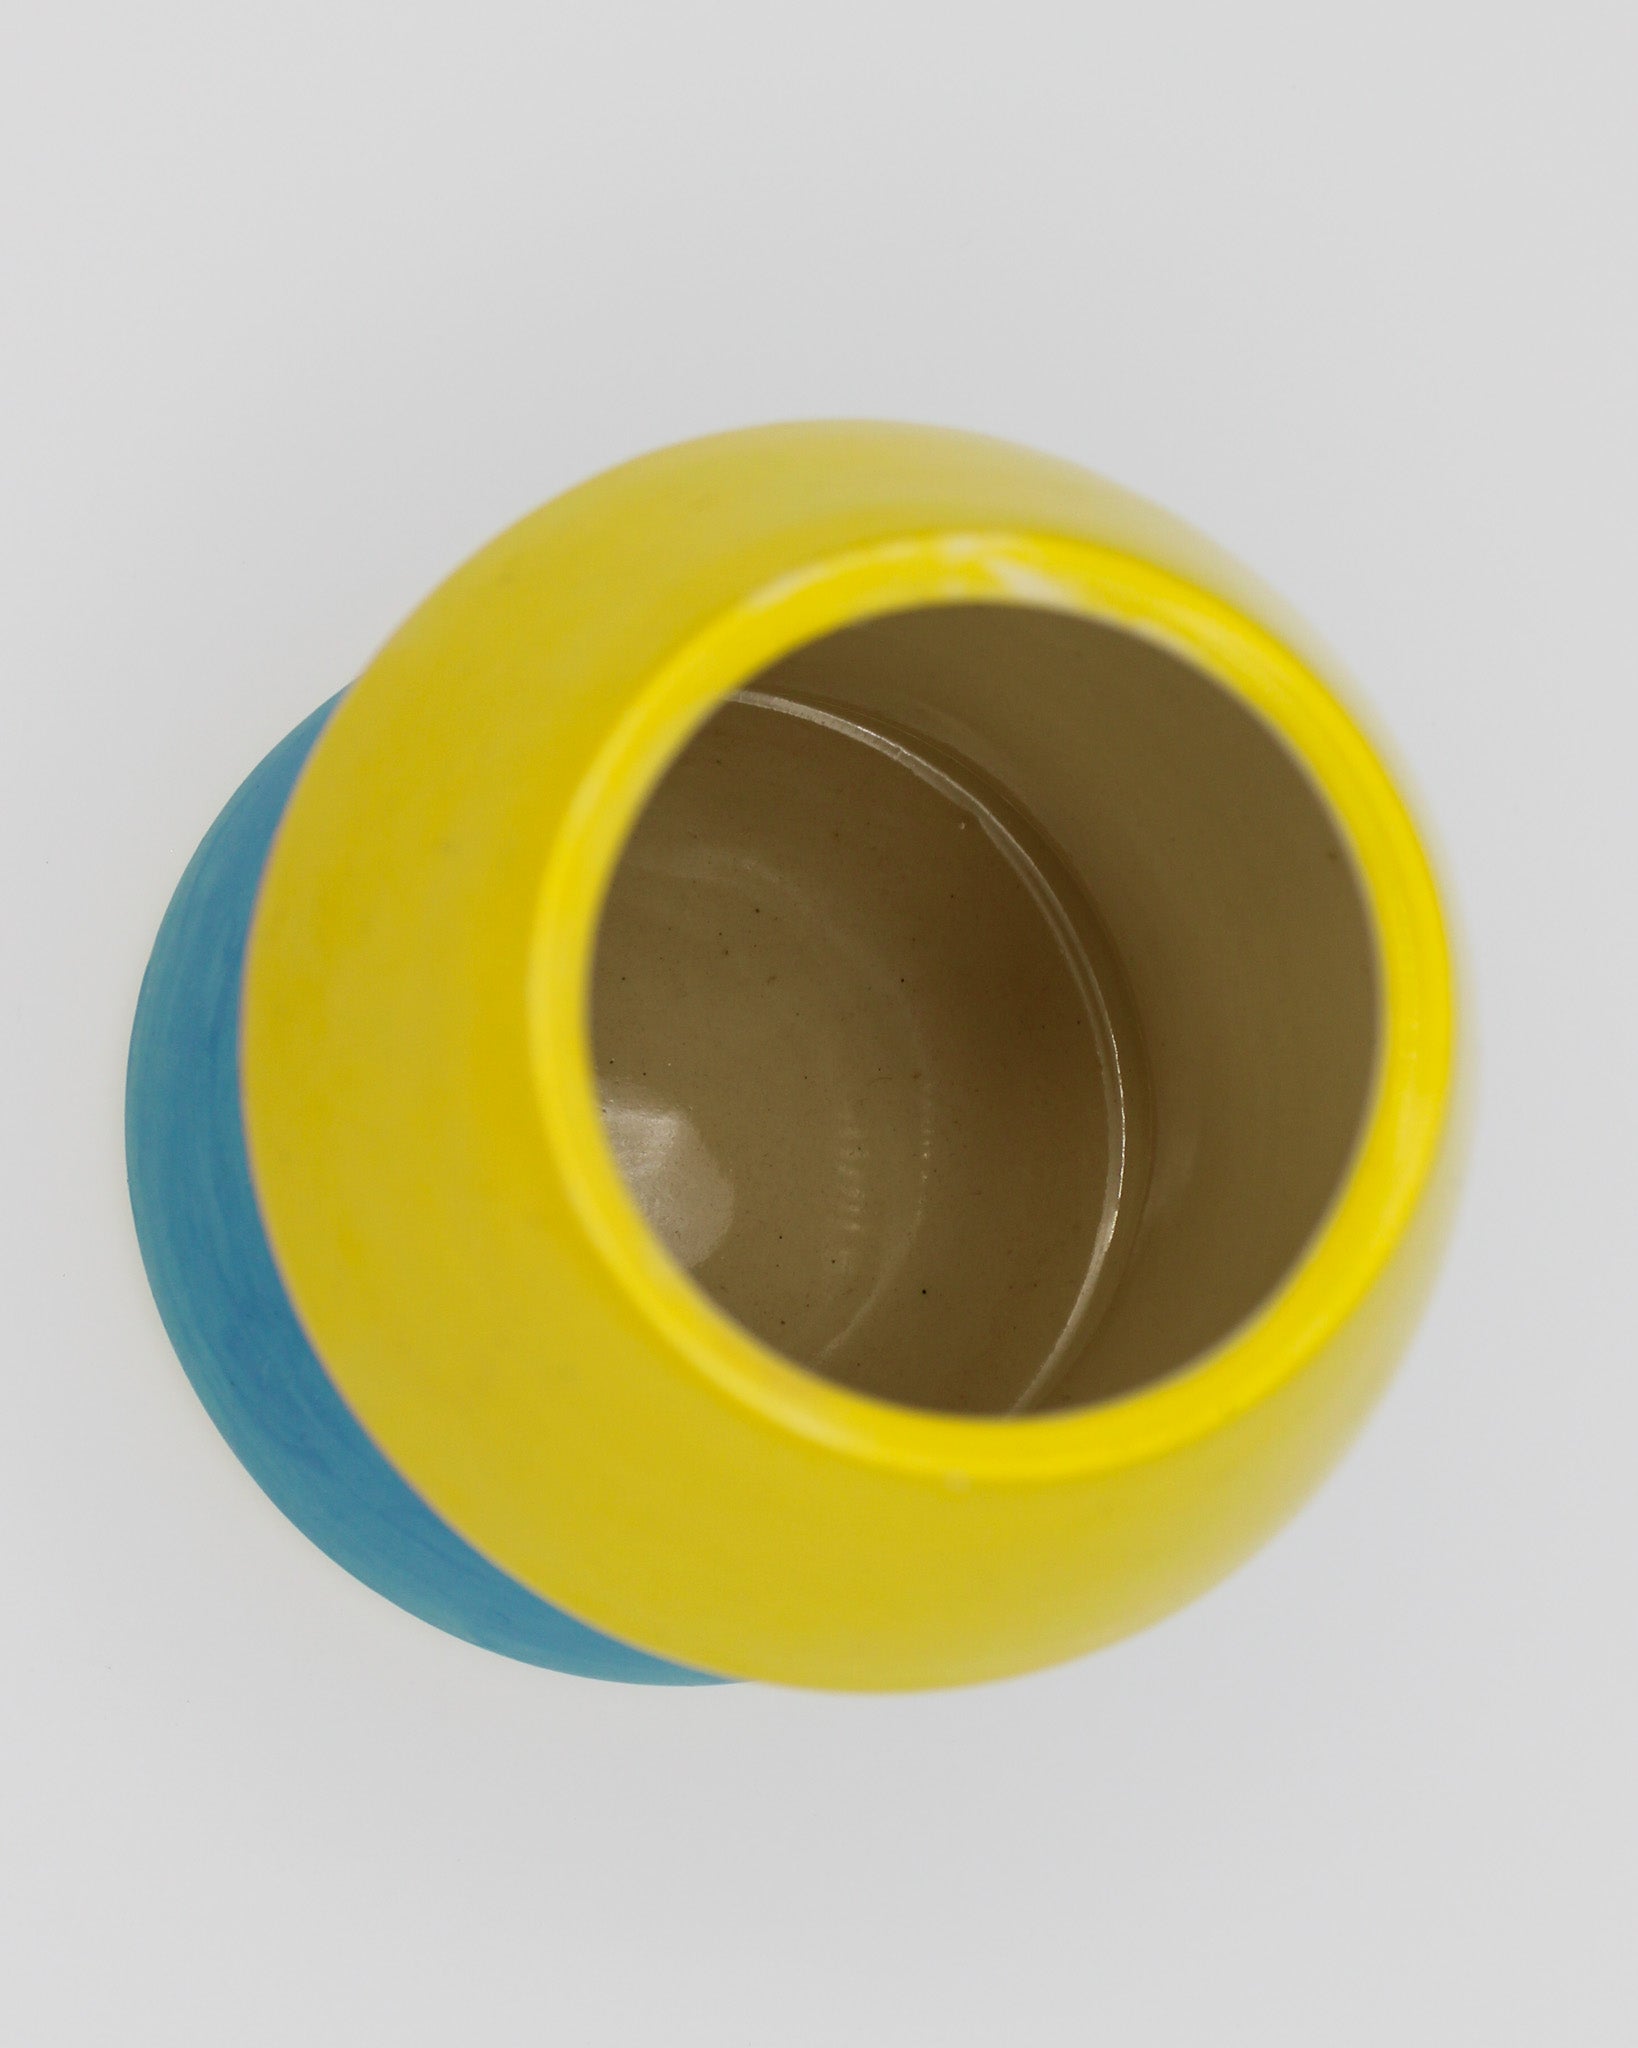 Primary Vase/Utility Cup